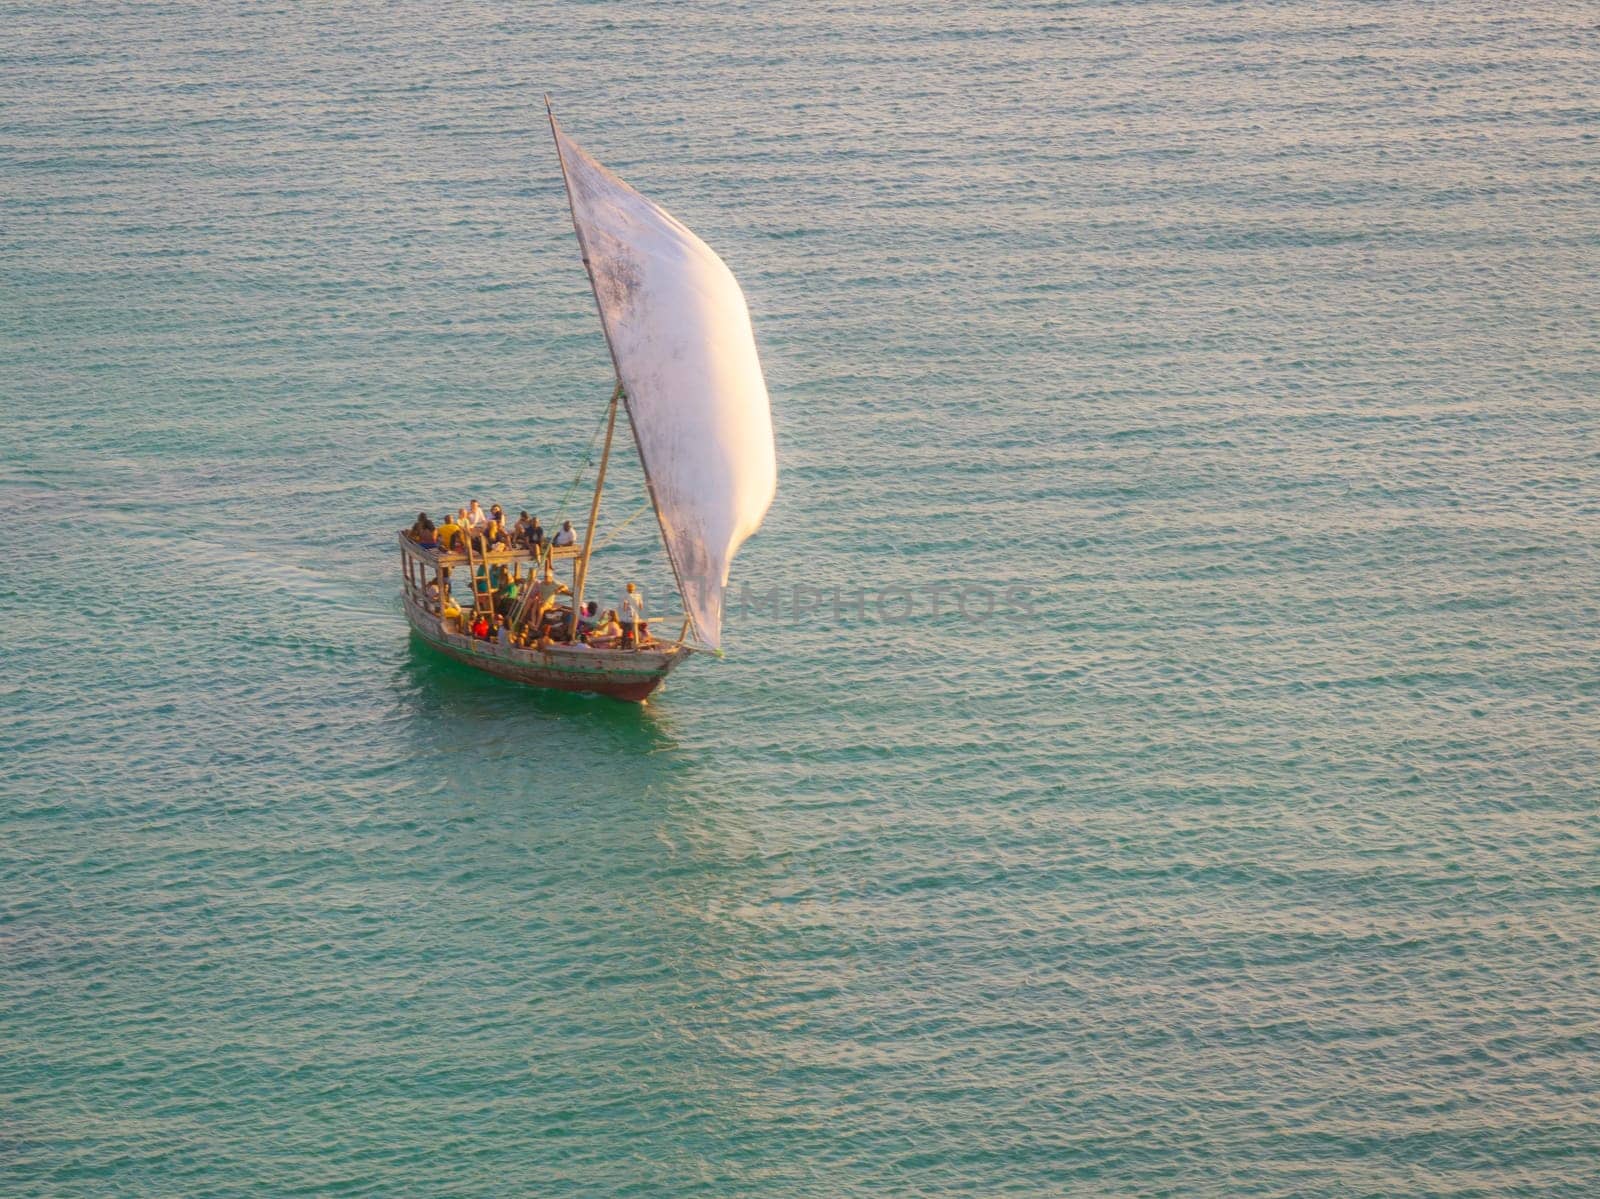 Dhow boat sails in the ocean at sunset by Robertobinetti70